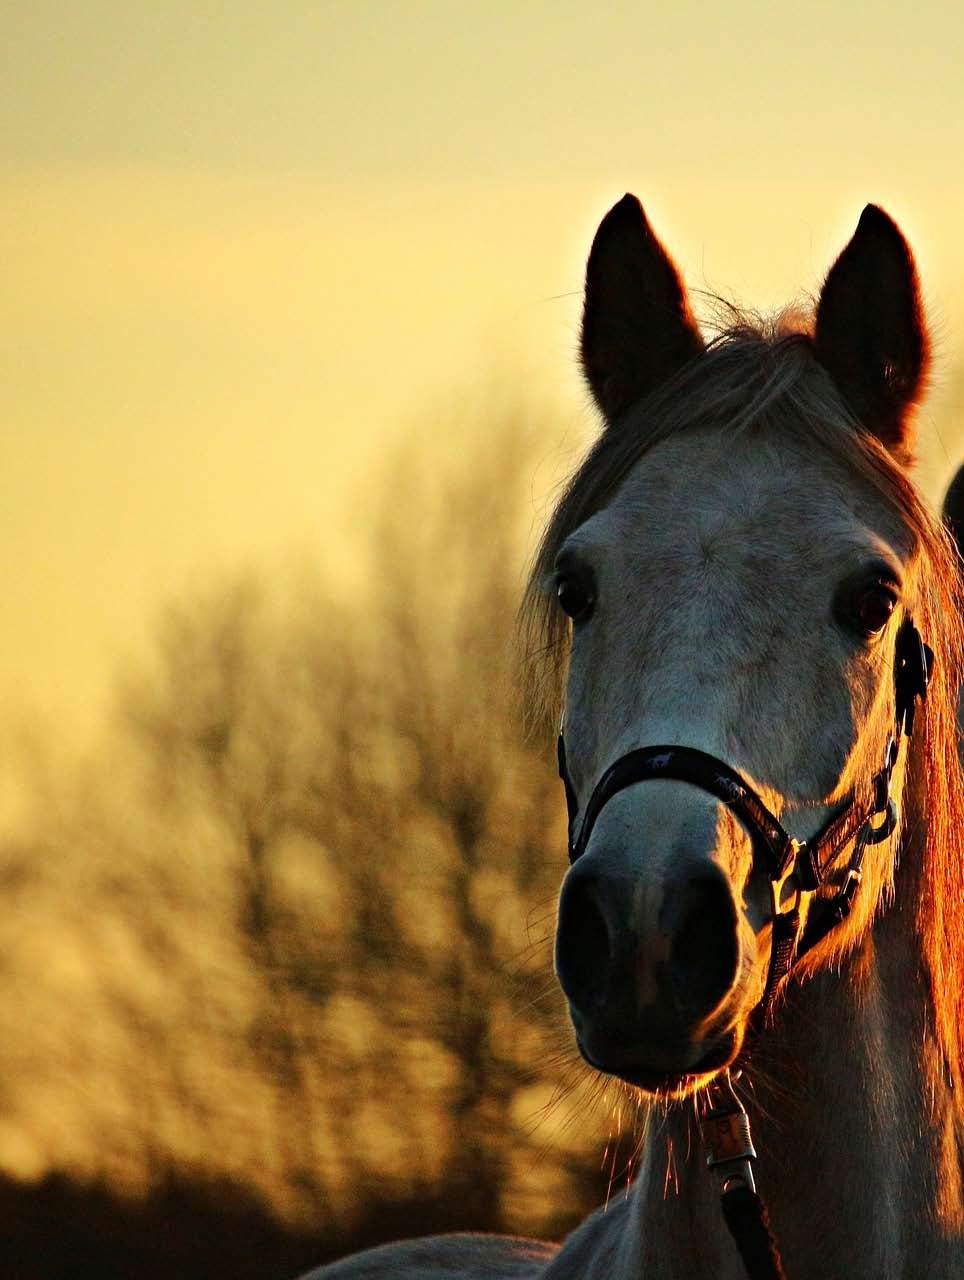 Horse Project News Horse ID Sheets The due date for Horse ID sheets has been set by the State Office for May 1st.